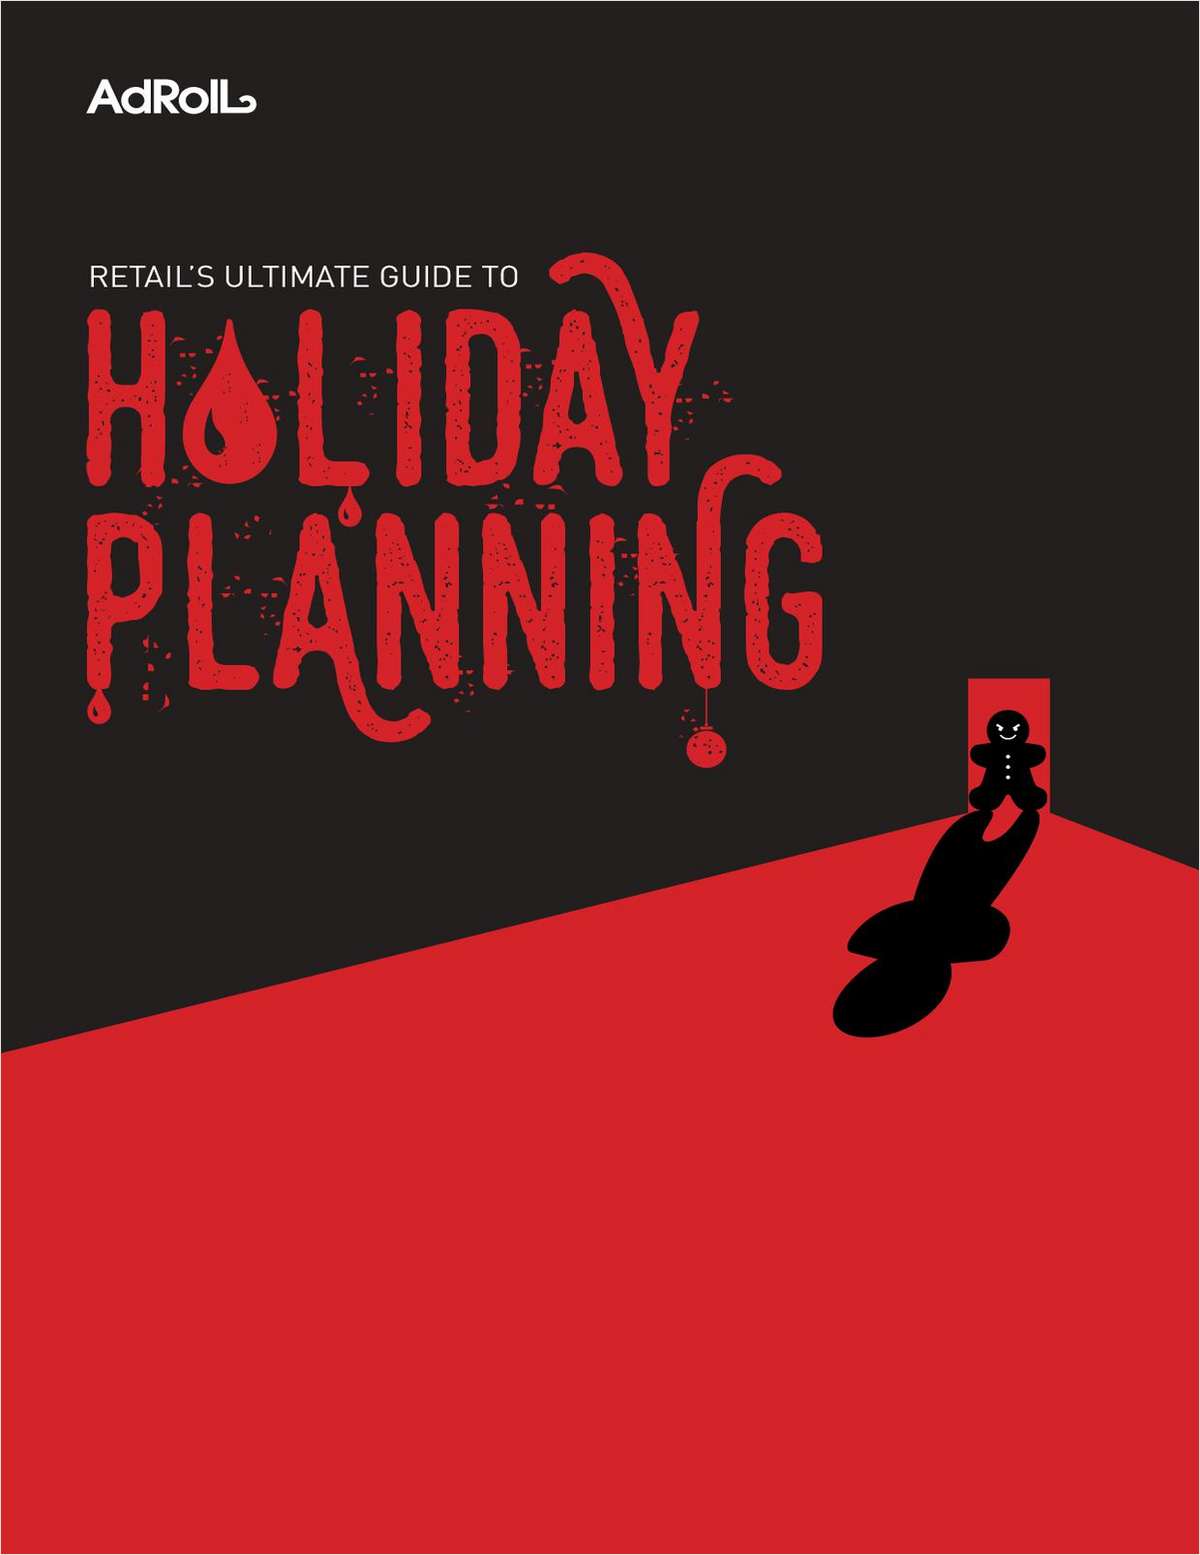 Retail's Ultimate Guide to Holiday Planning